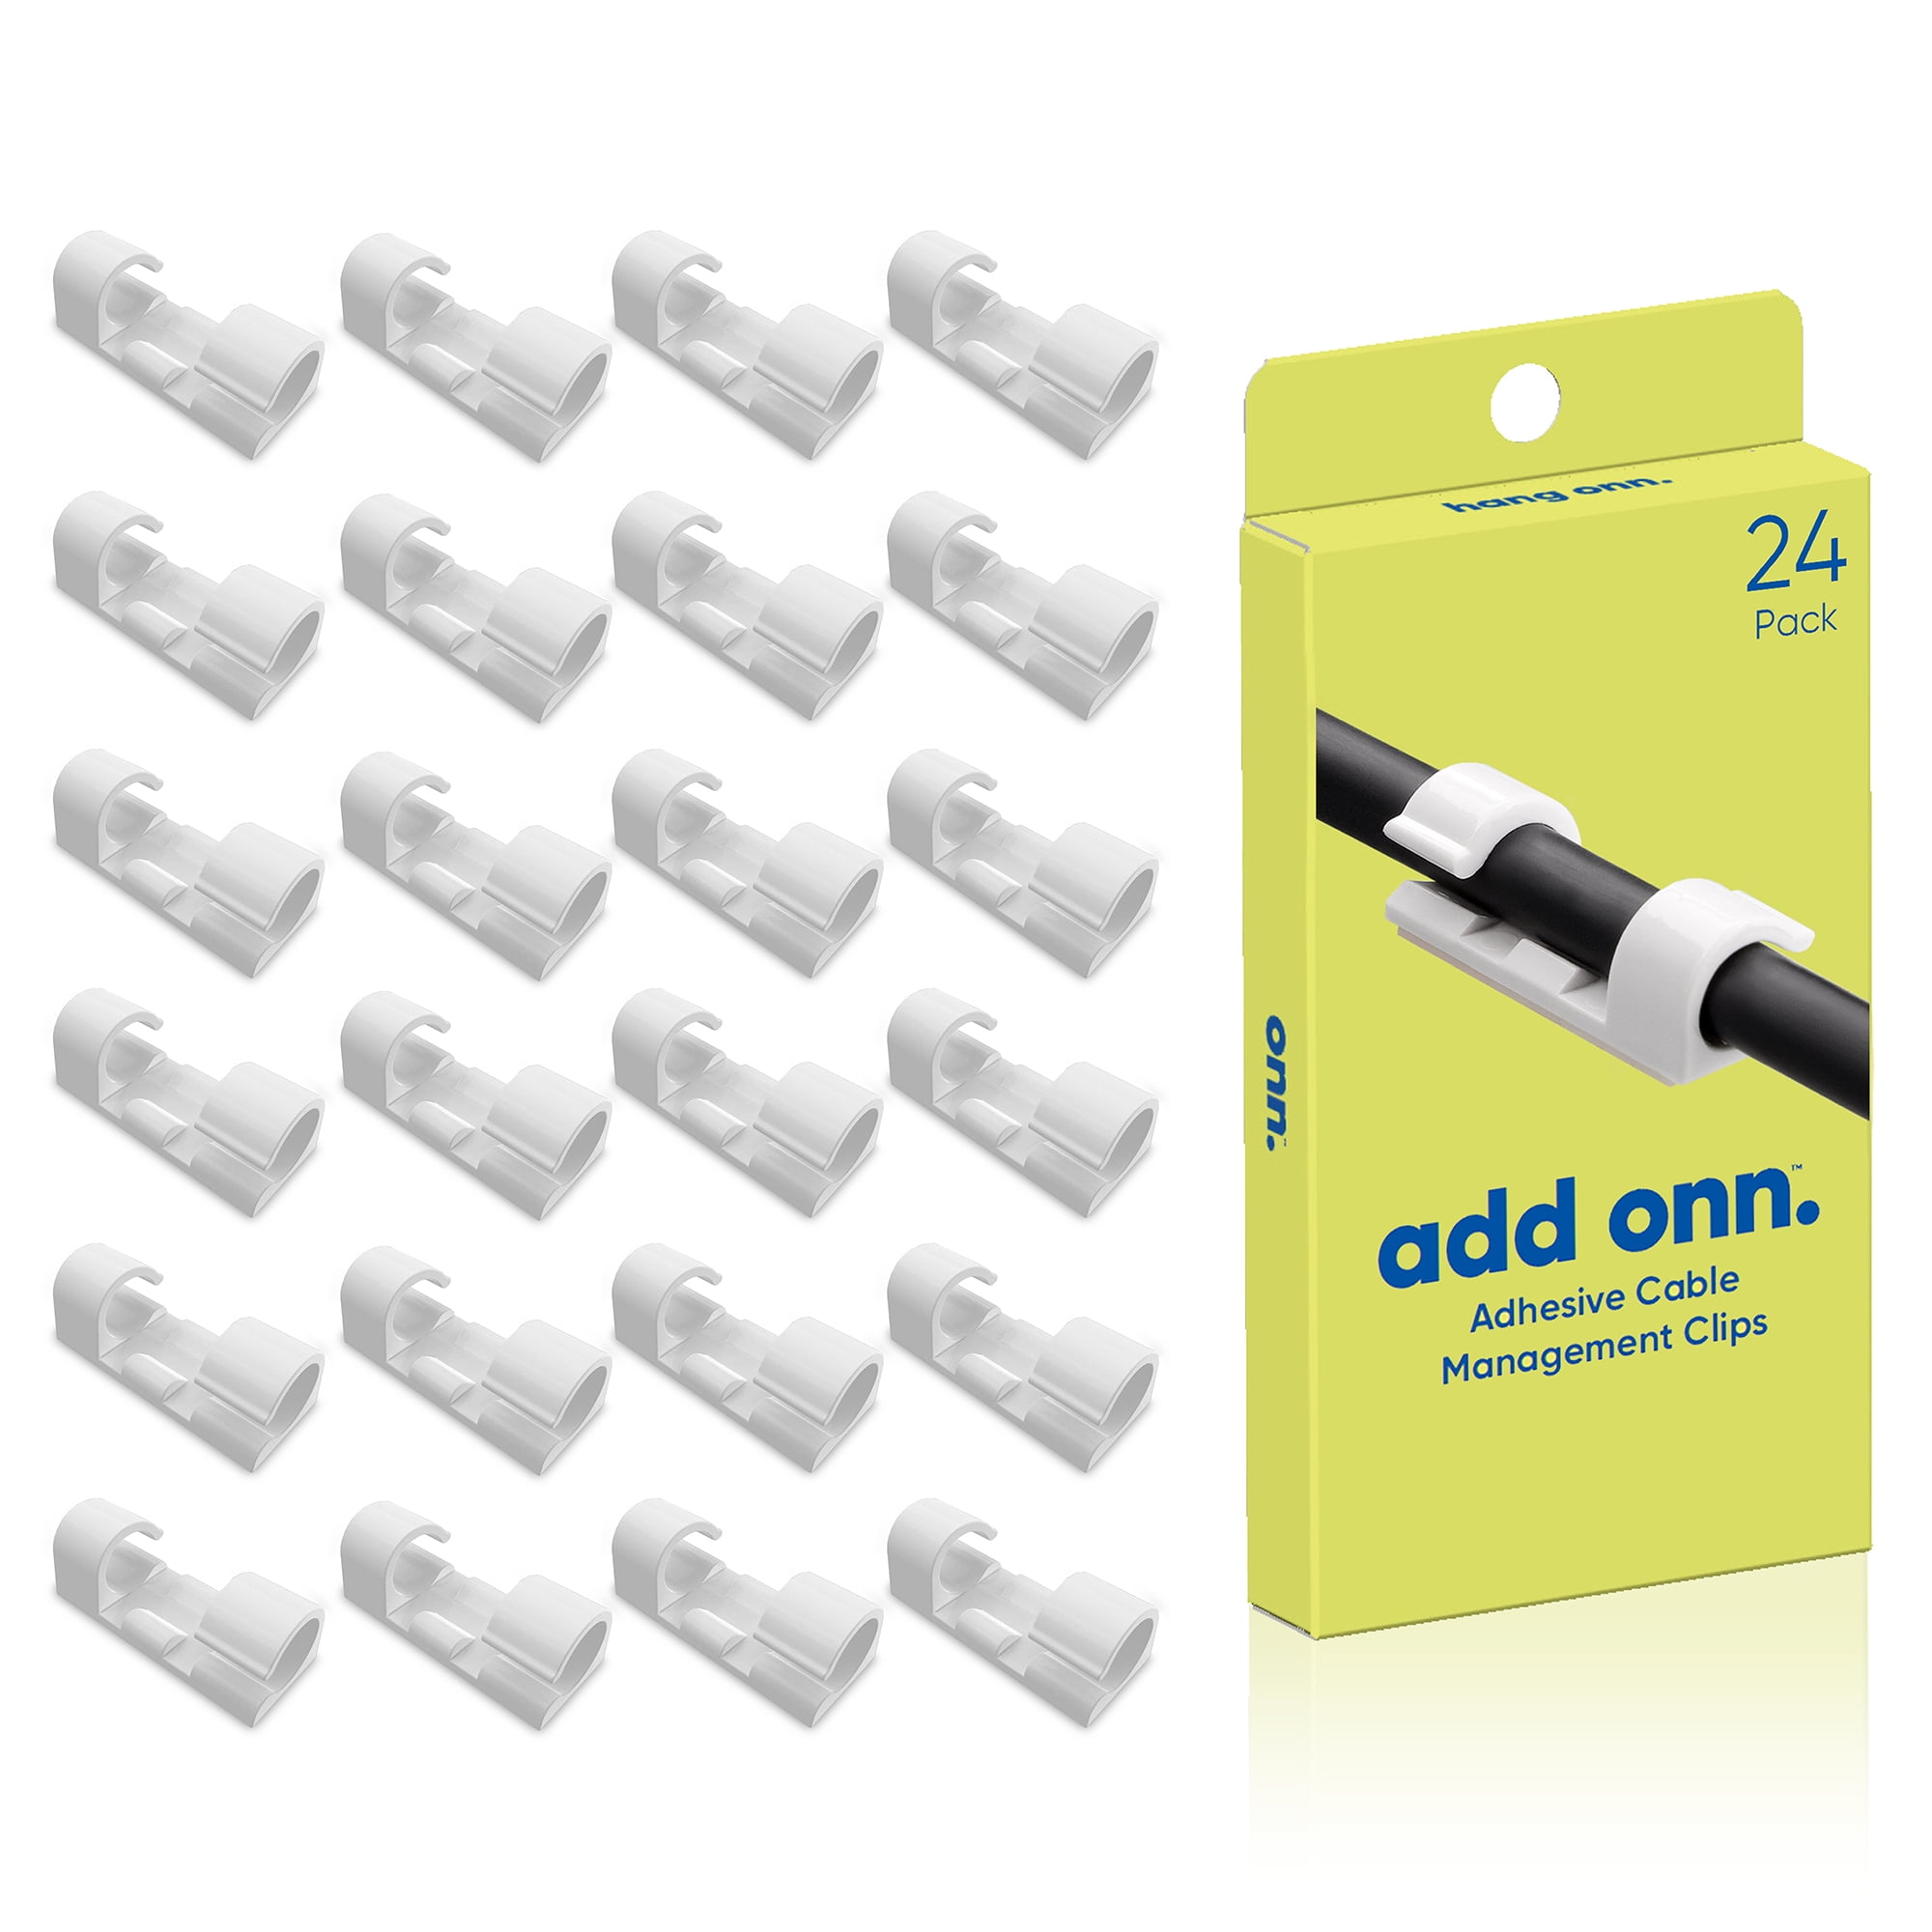 Peel and Stick Cord Covers & Organizers at